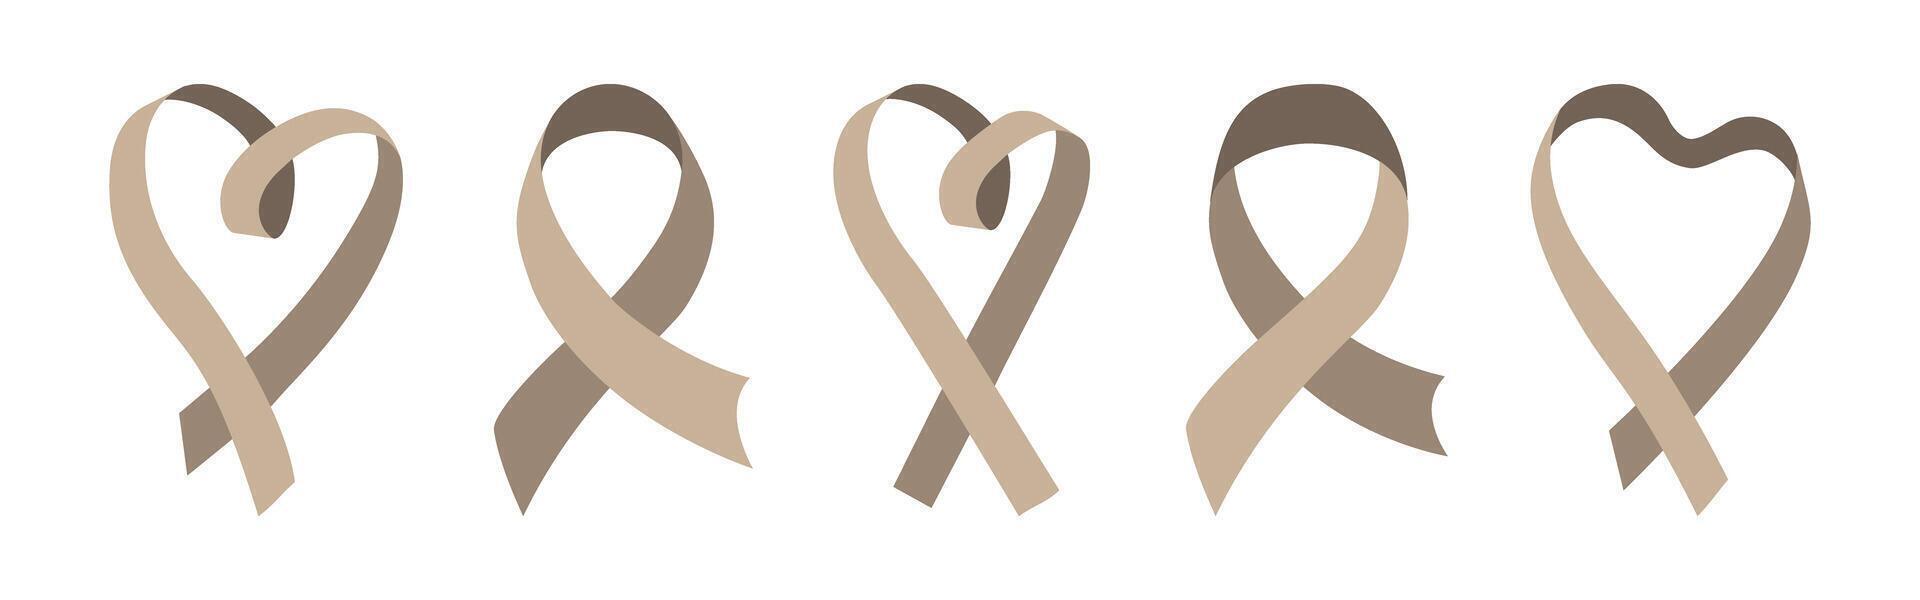 Set of ribbons isolated on a white background vector